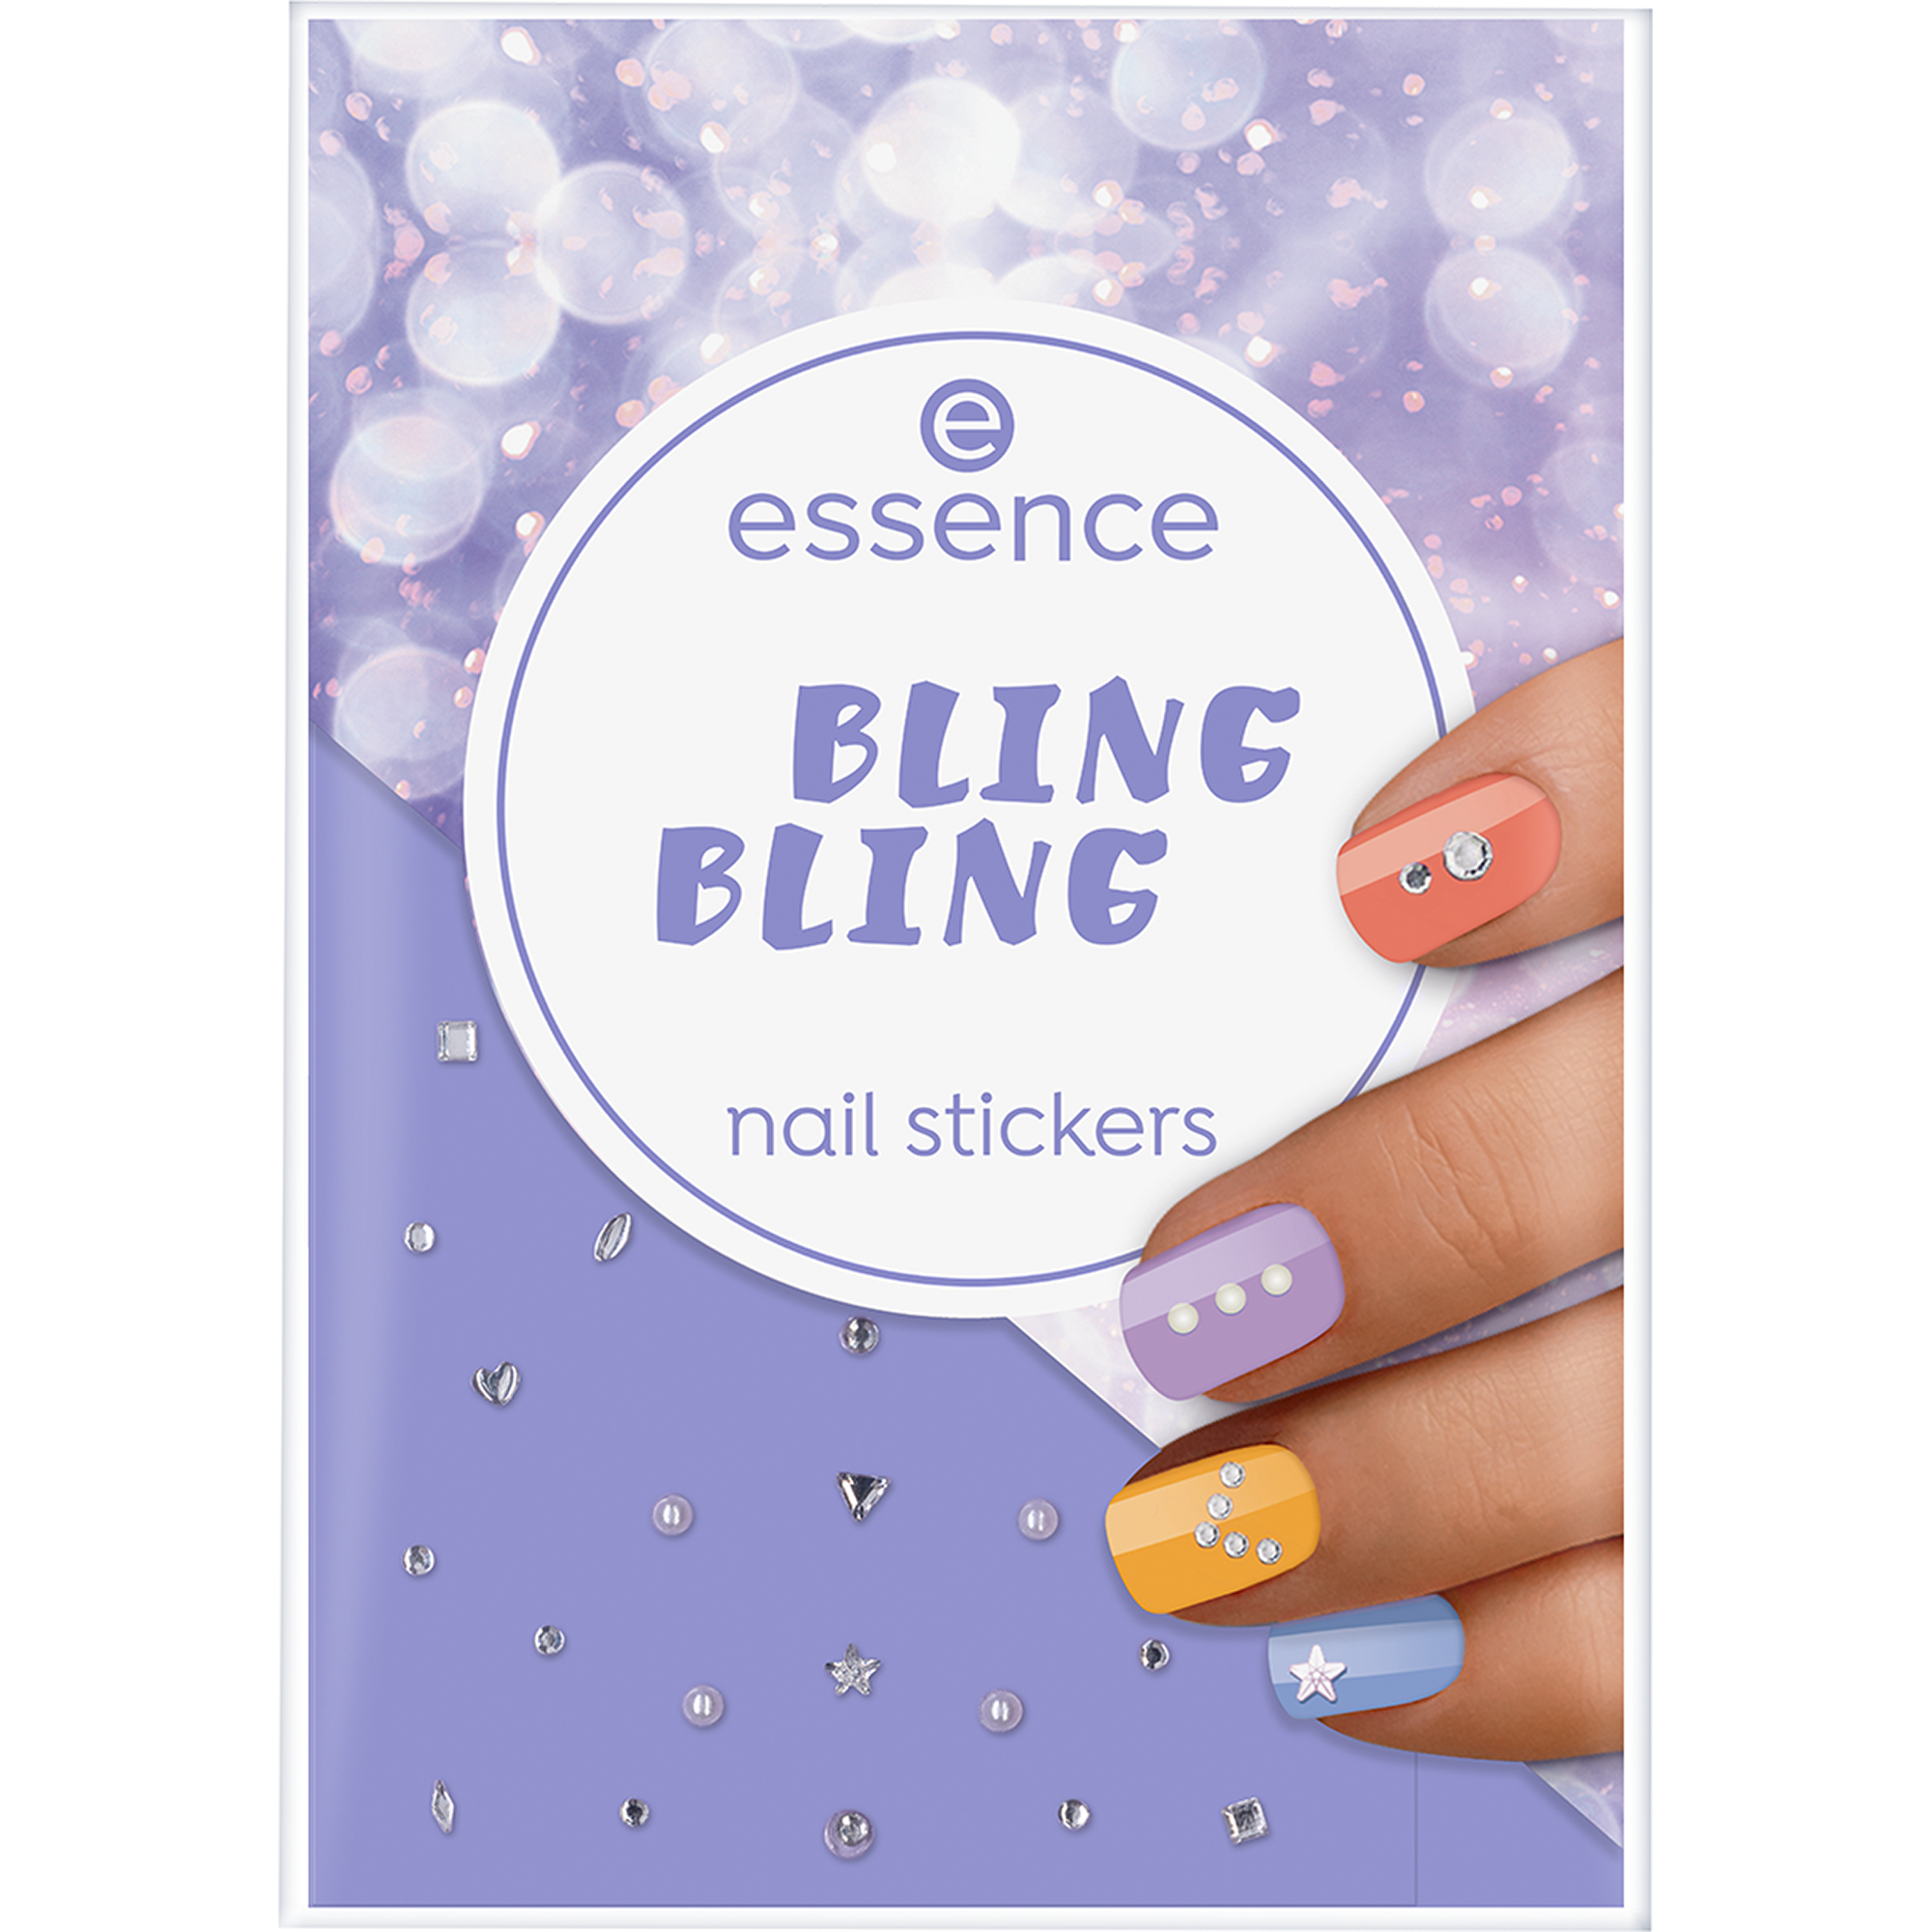 BLING BLING nail stickers